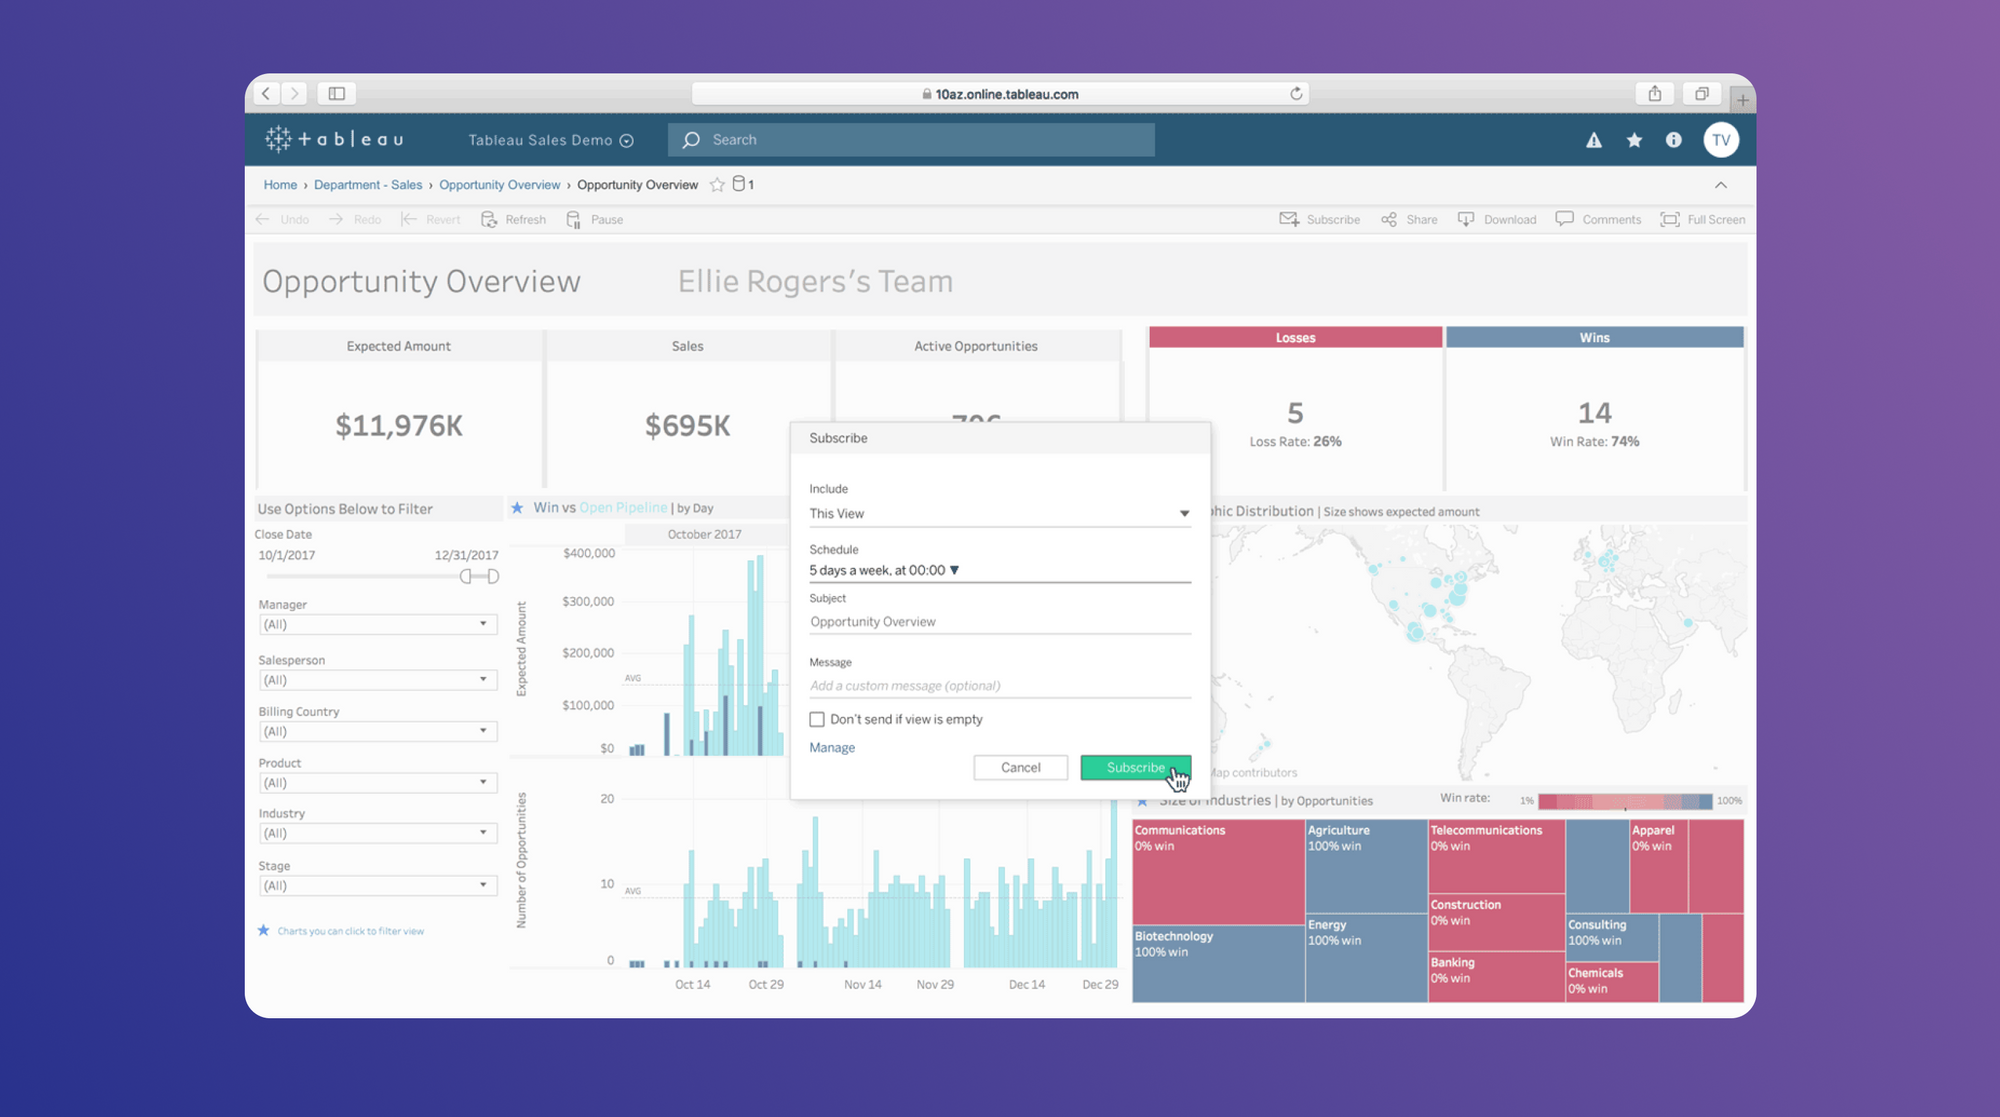 What is a business intelligence dashboard and how do you build one?